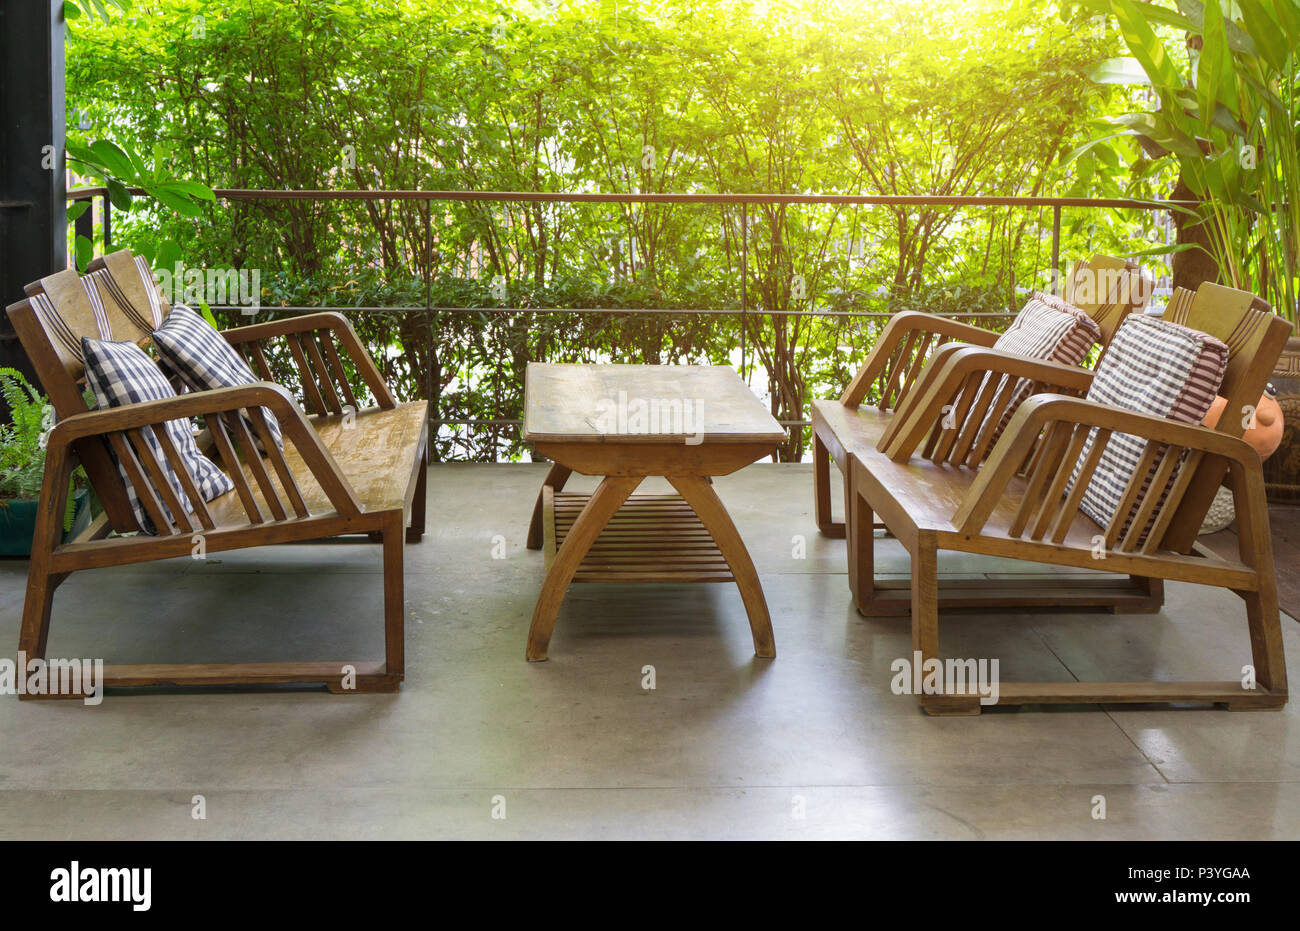 Wooden Table And Chairs Outdoor Furniture In The Garden For